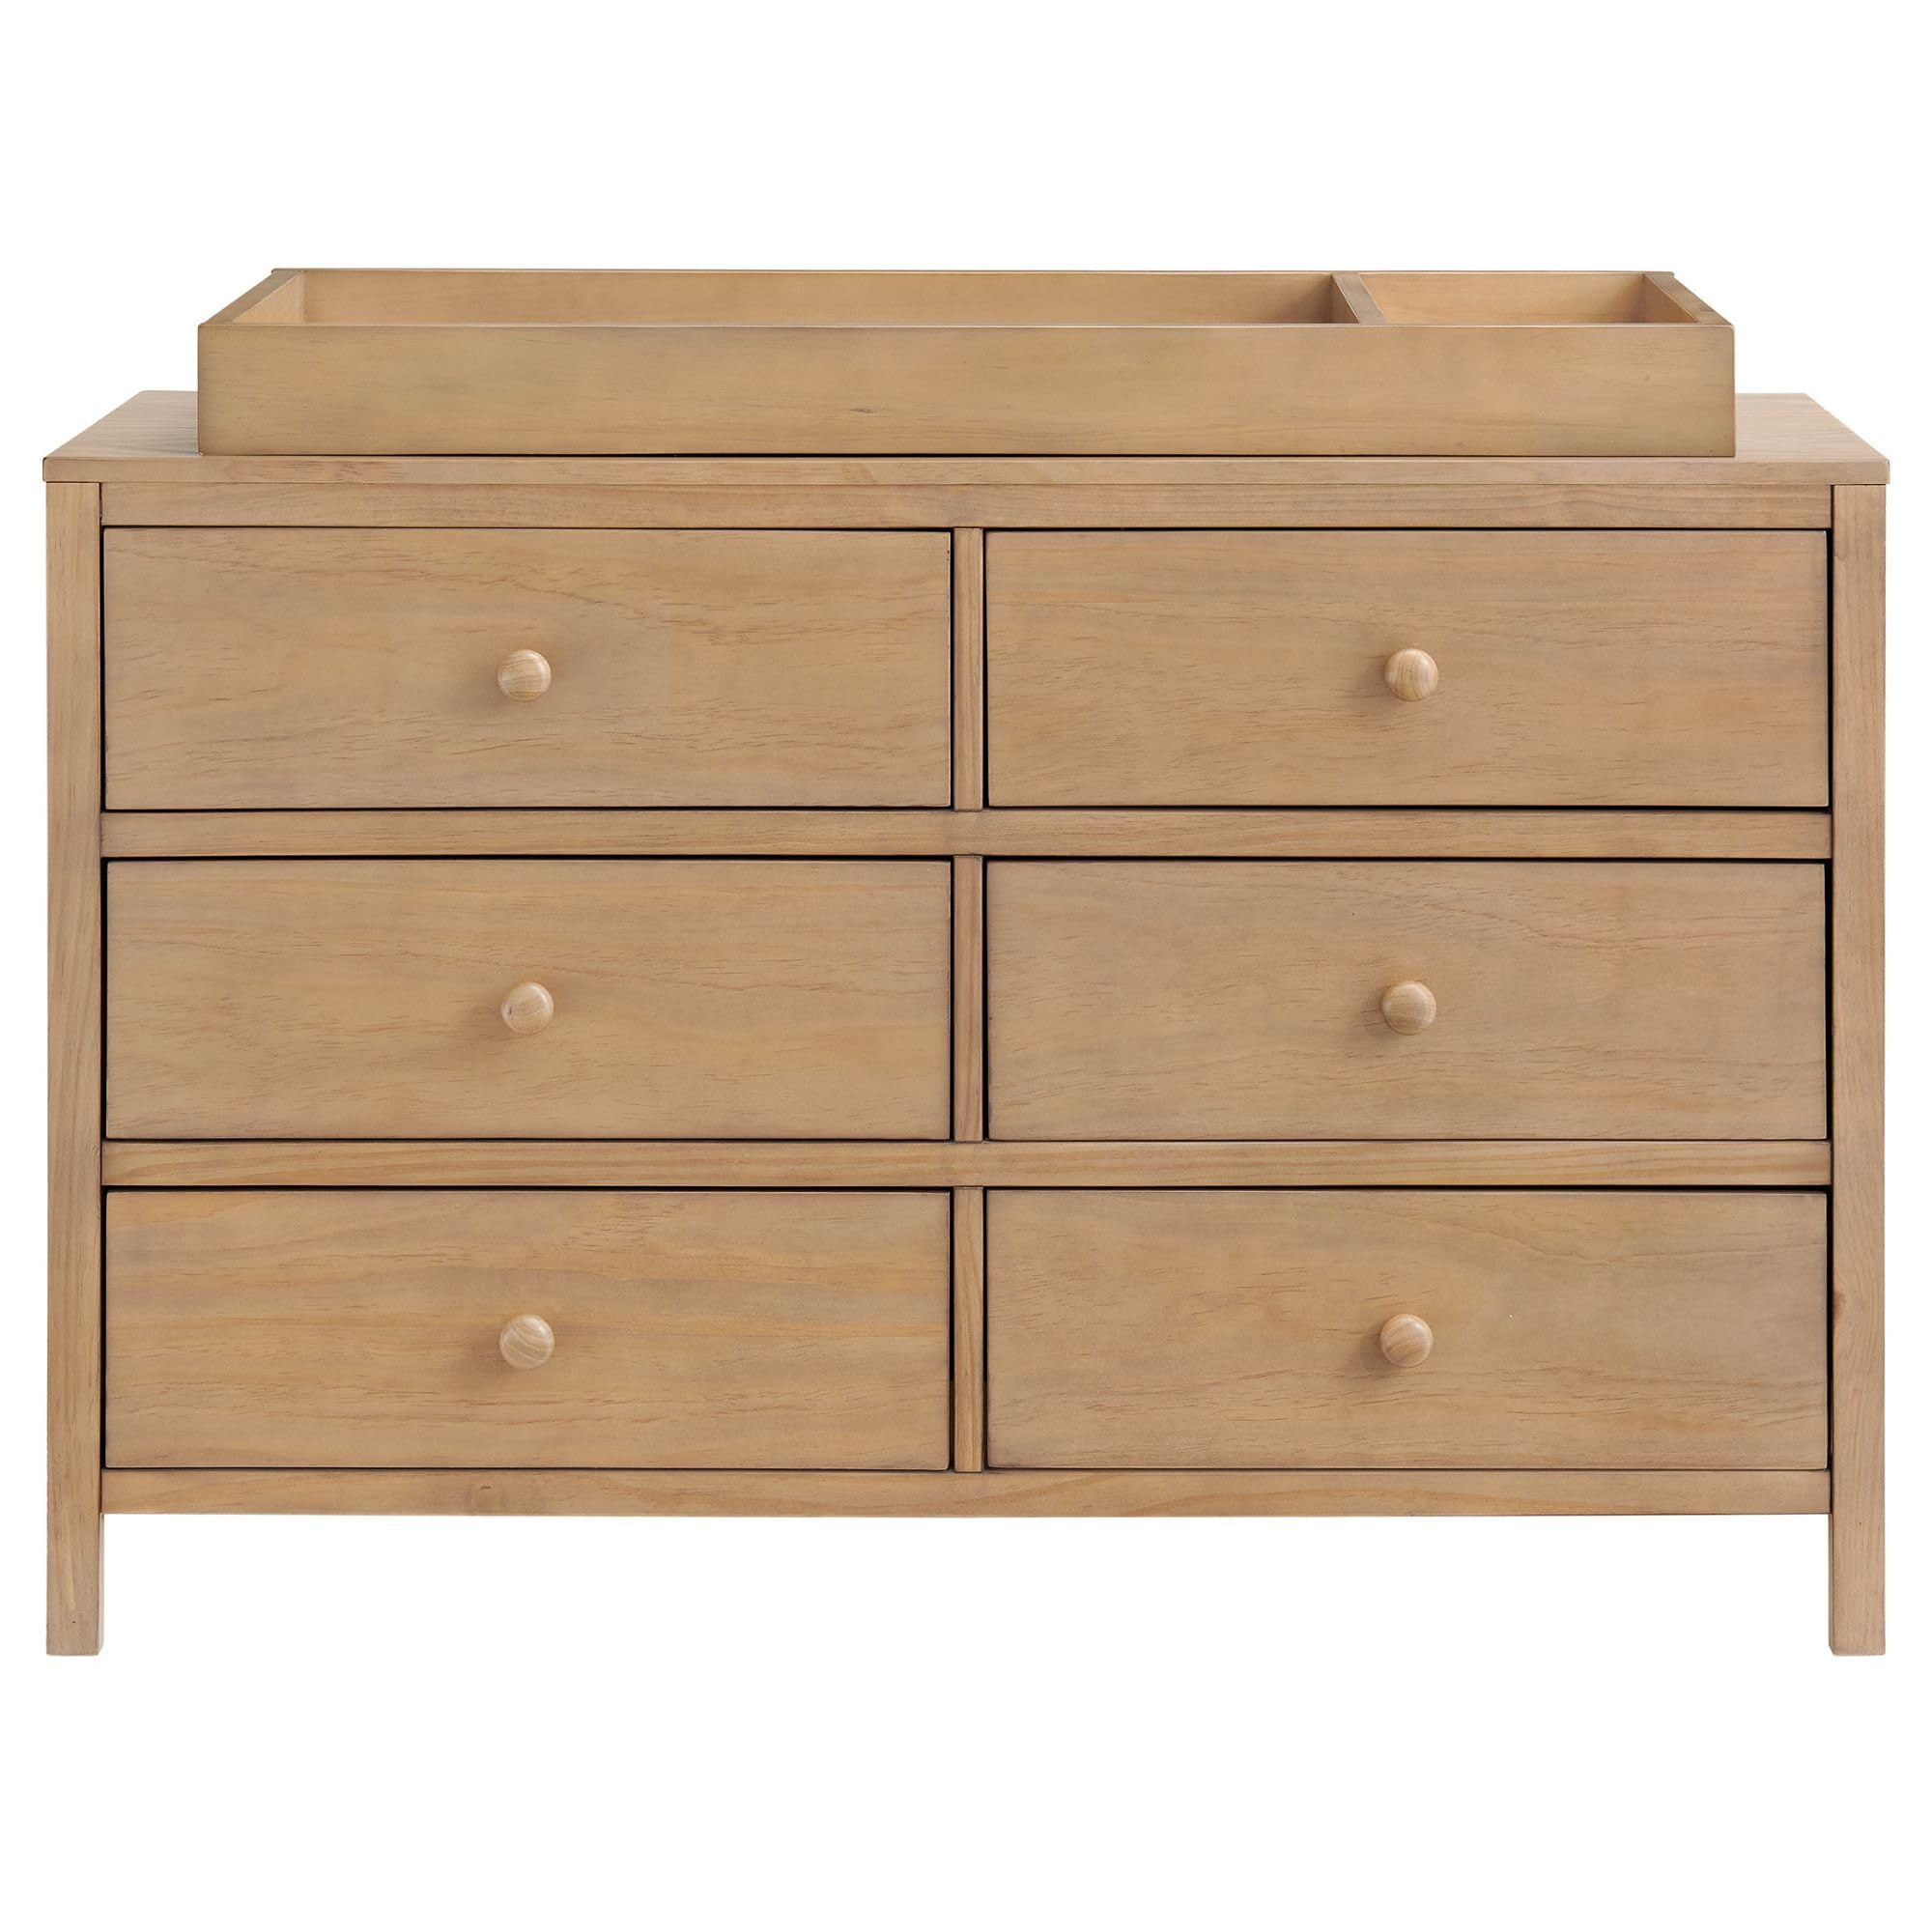 Oxford Baby Everlee Changing Topper for 6-Drawer Double Dresser, Honey Wood